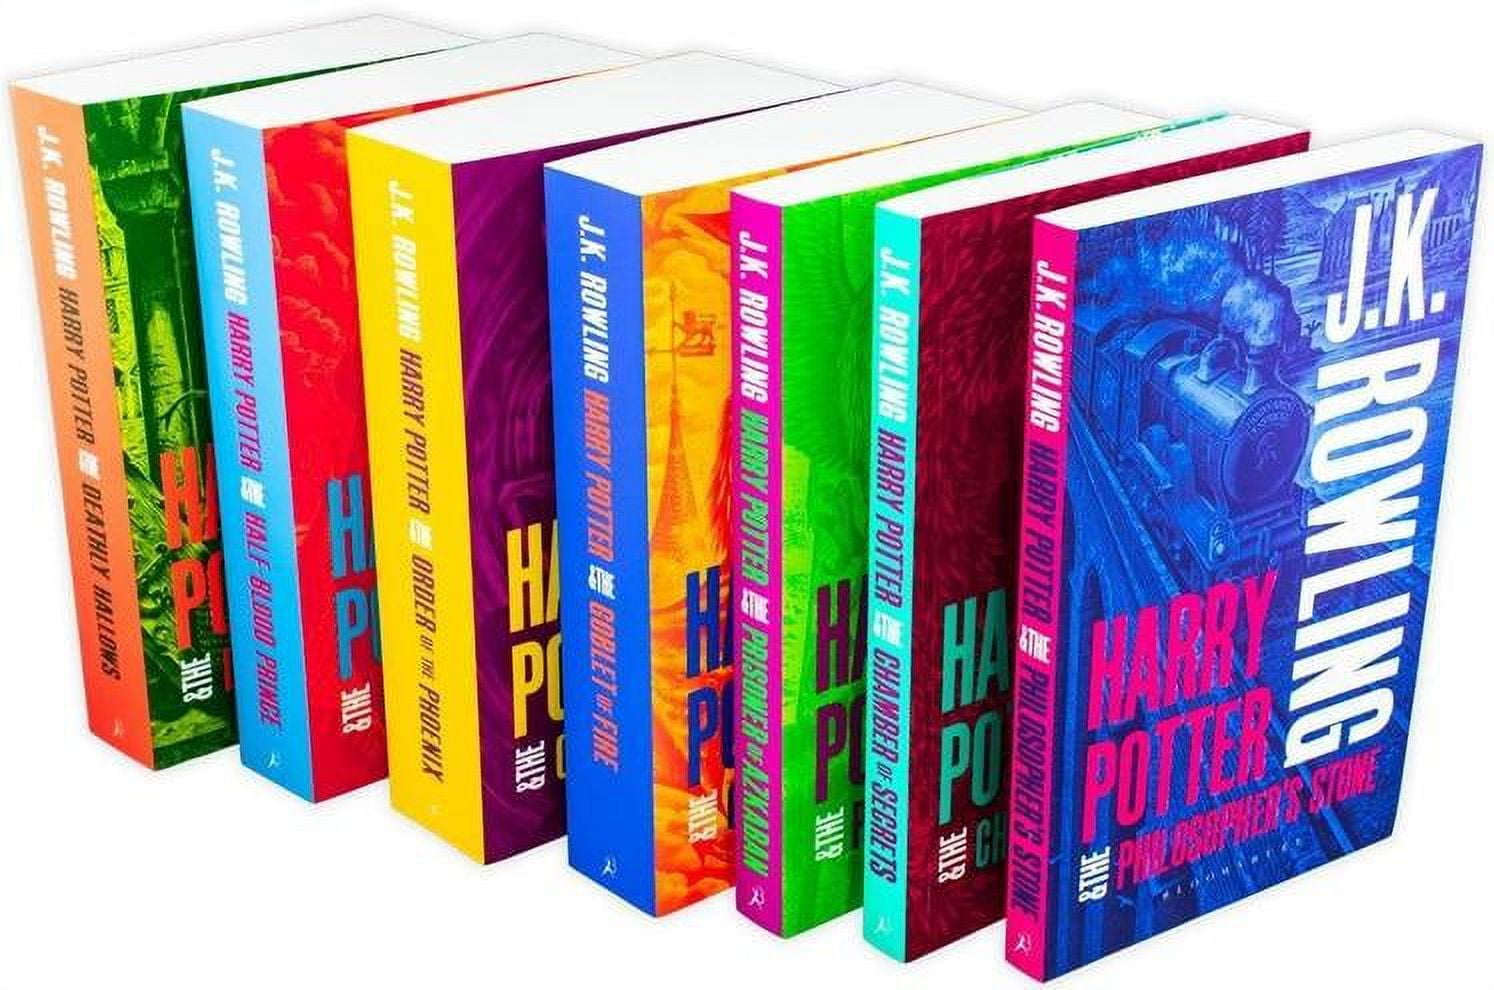 This Harry Potter box set doesn't fit all of the books if any of them have  actually been read or taken out : r/mildlyinfuriating